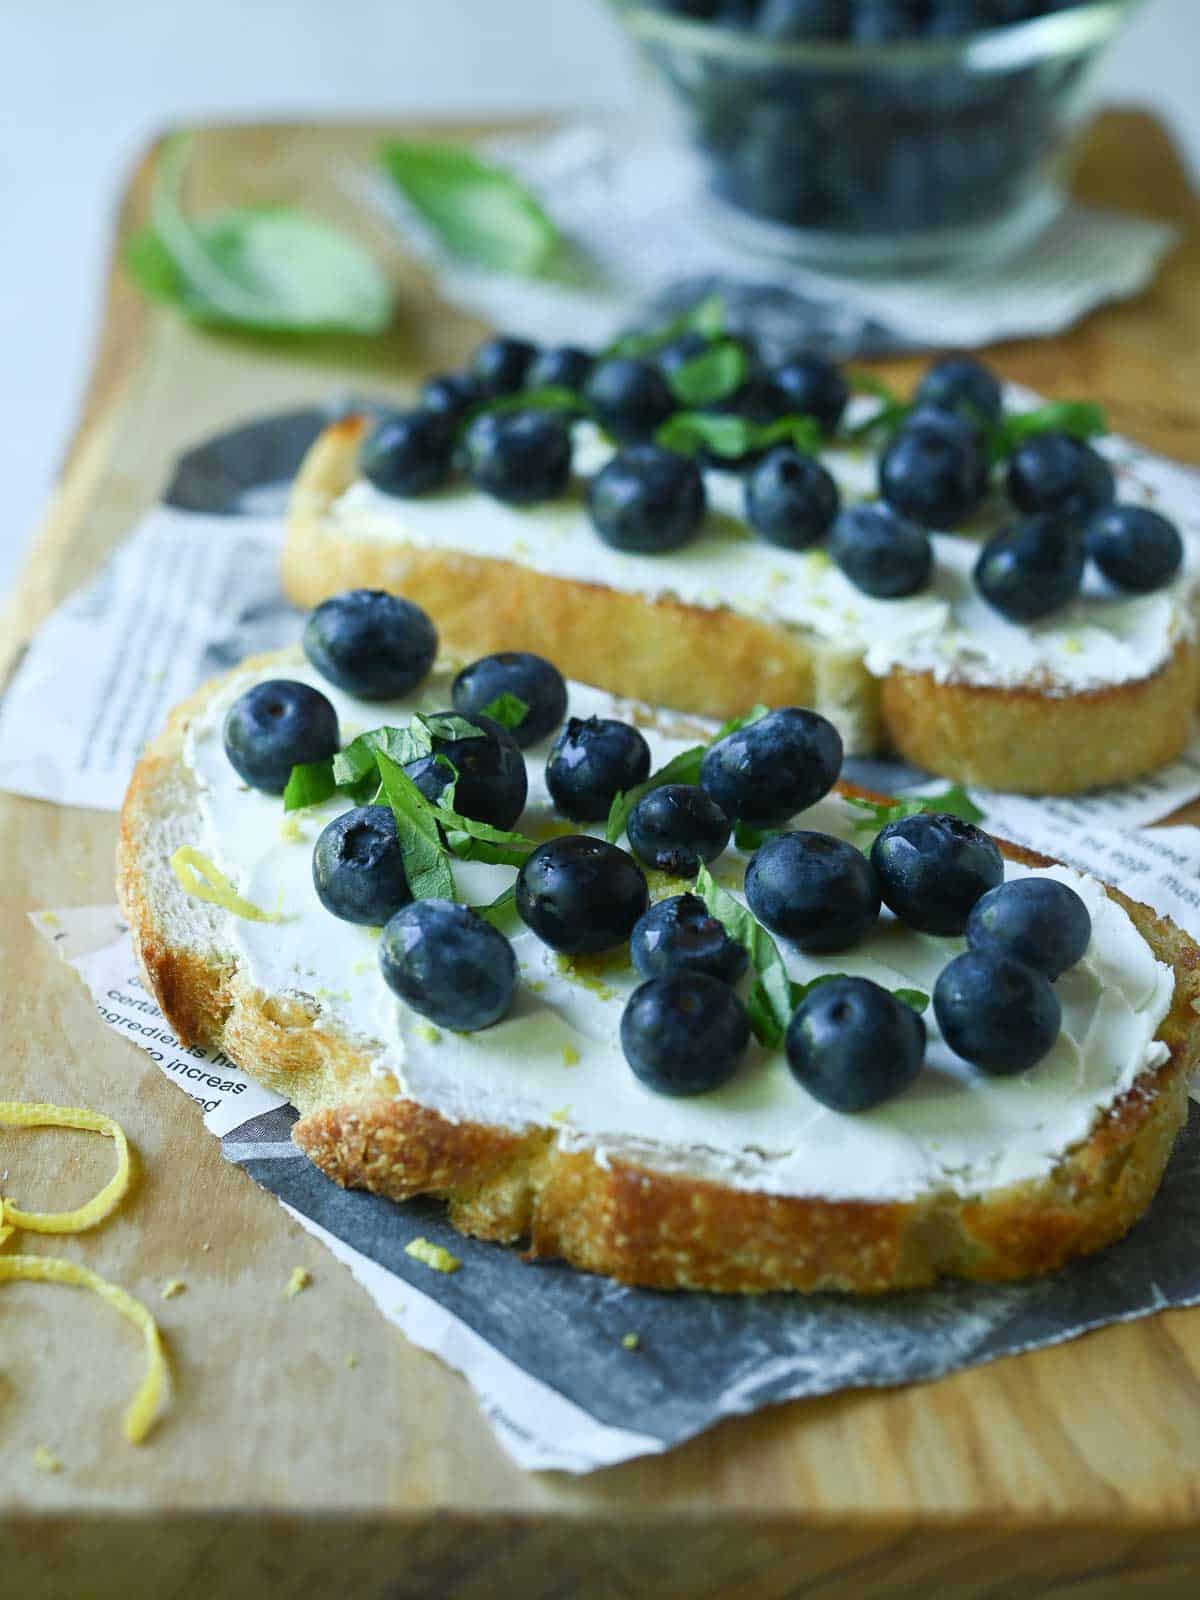 Two blueberry toasts on a wood board.